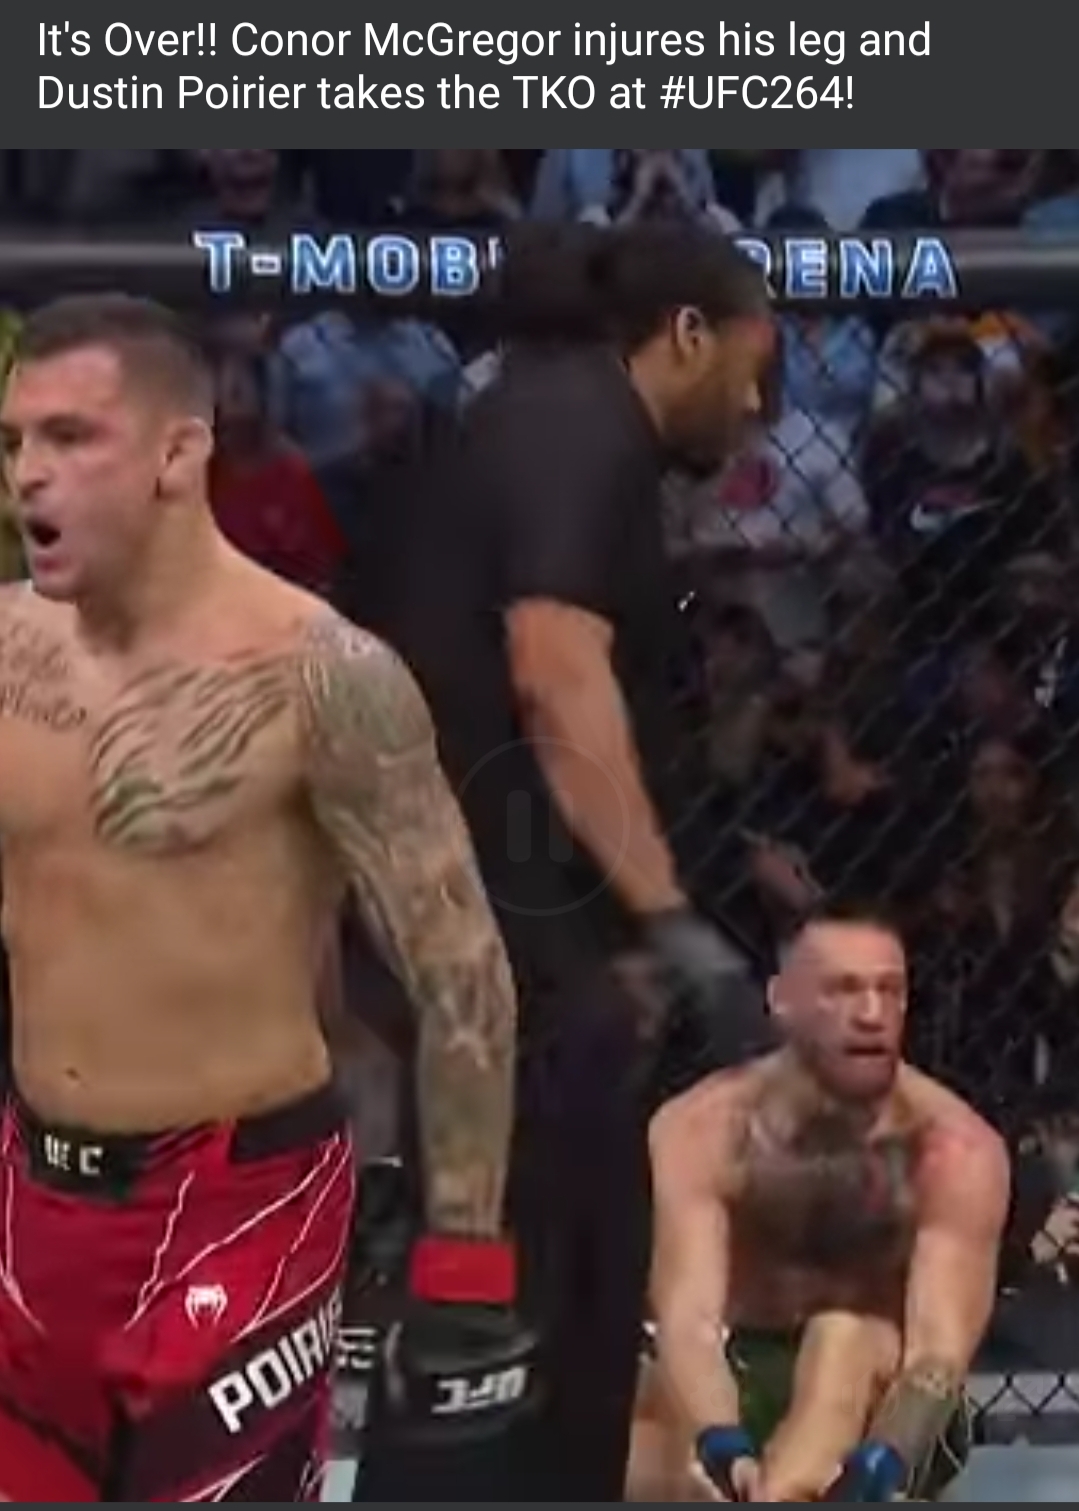 Dustin Poirier beats Conor McGregor with a TKO in UFC 264 after McGregor appears to have broken his leg or ankle